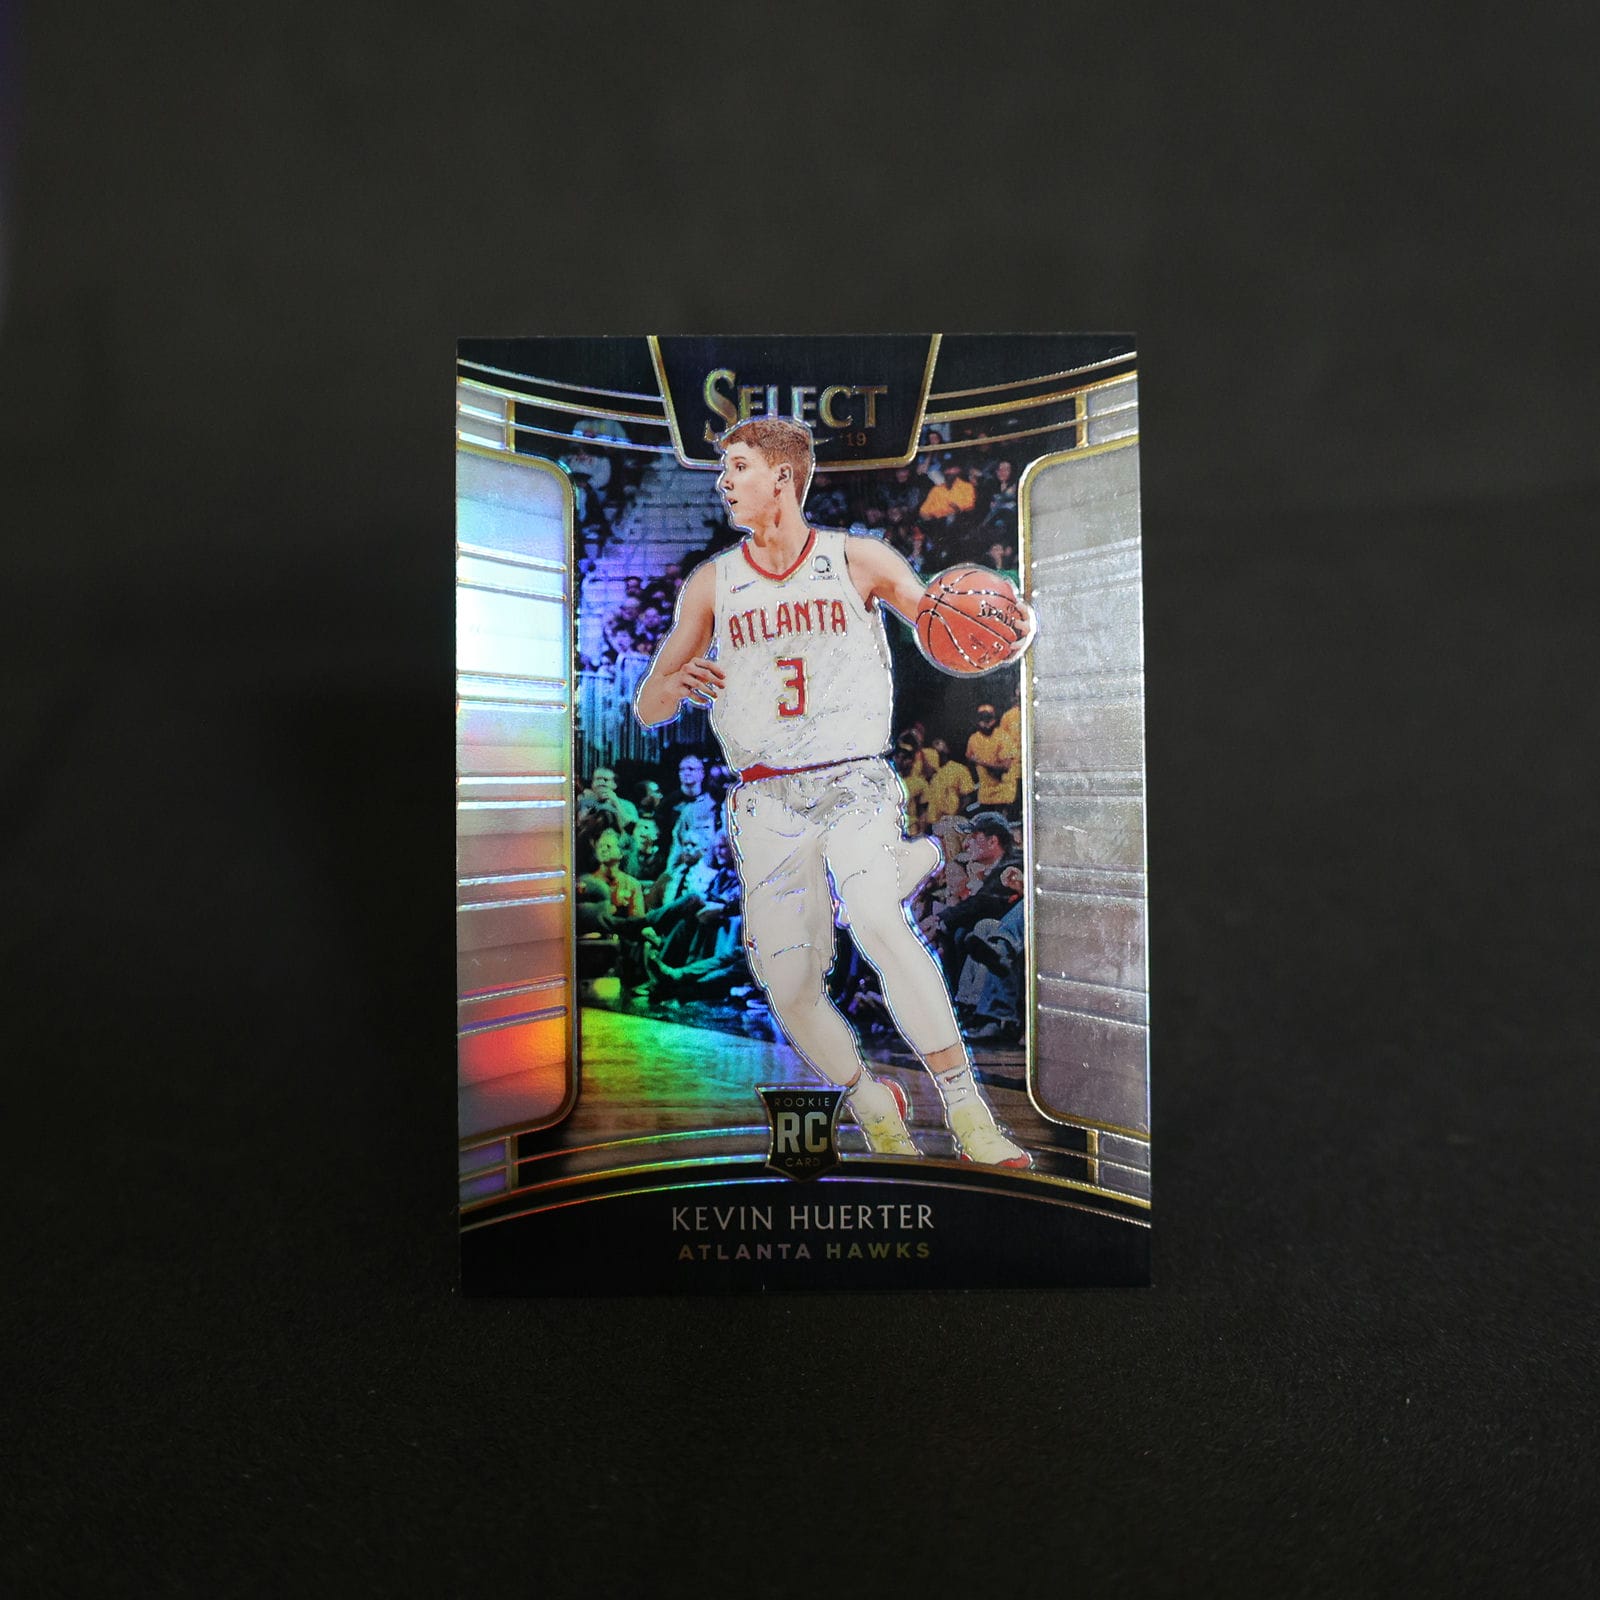 2018-19 Kevin Huerter Select Concourse Silver Prizm Rookie Card